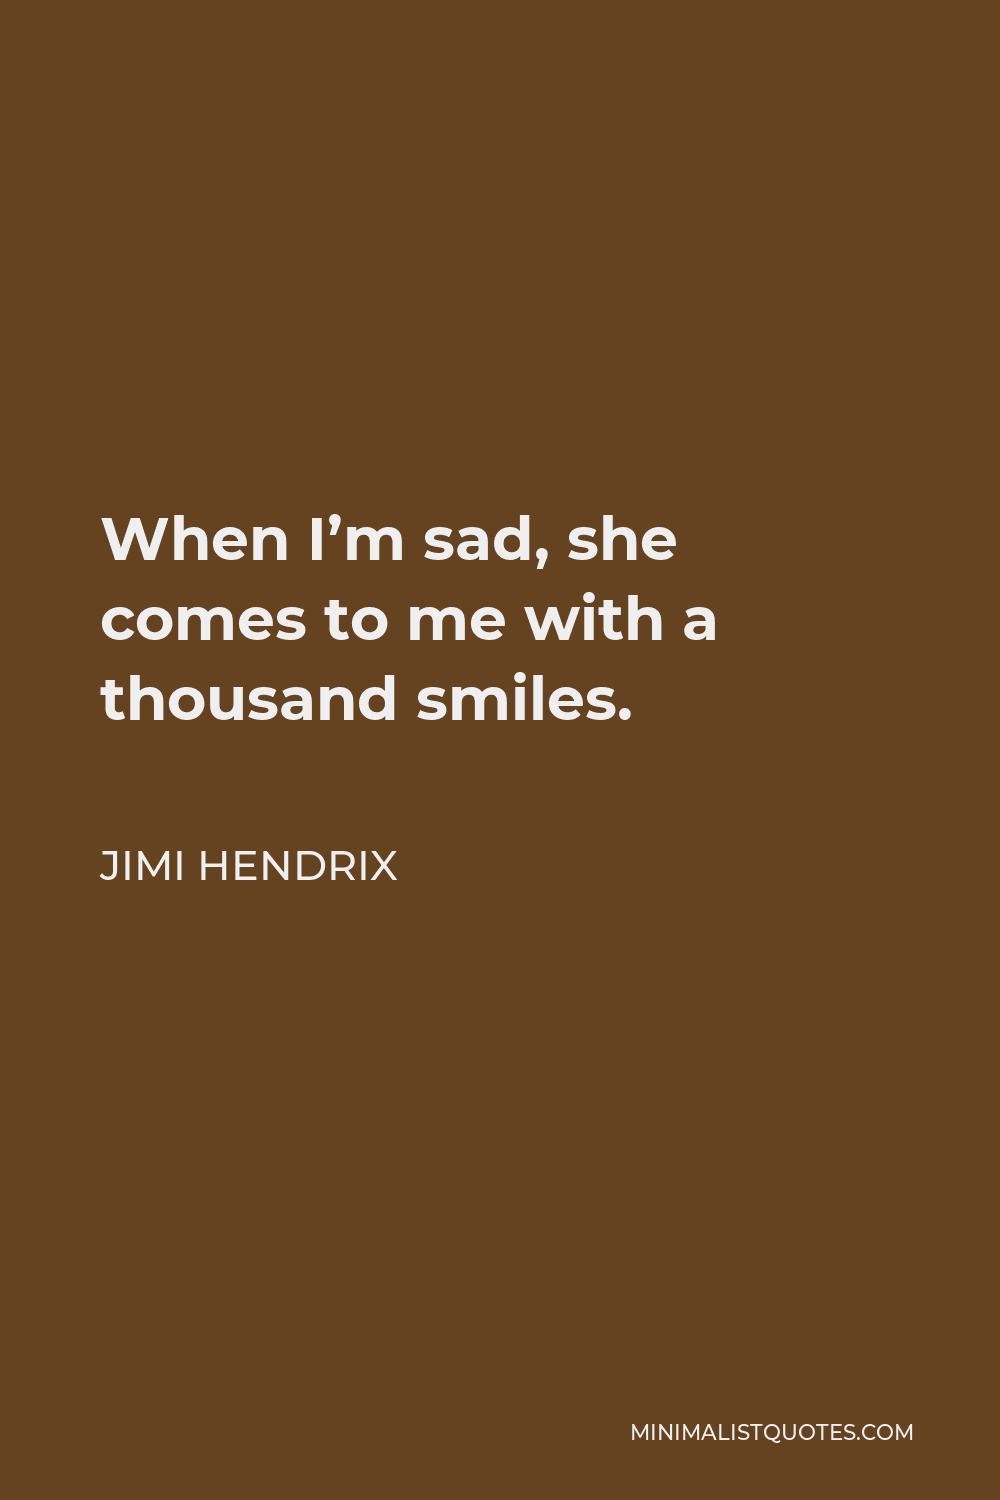 Jimi Hendrix Quote - When I’m sad, she comes to me with a thousand smiles.